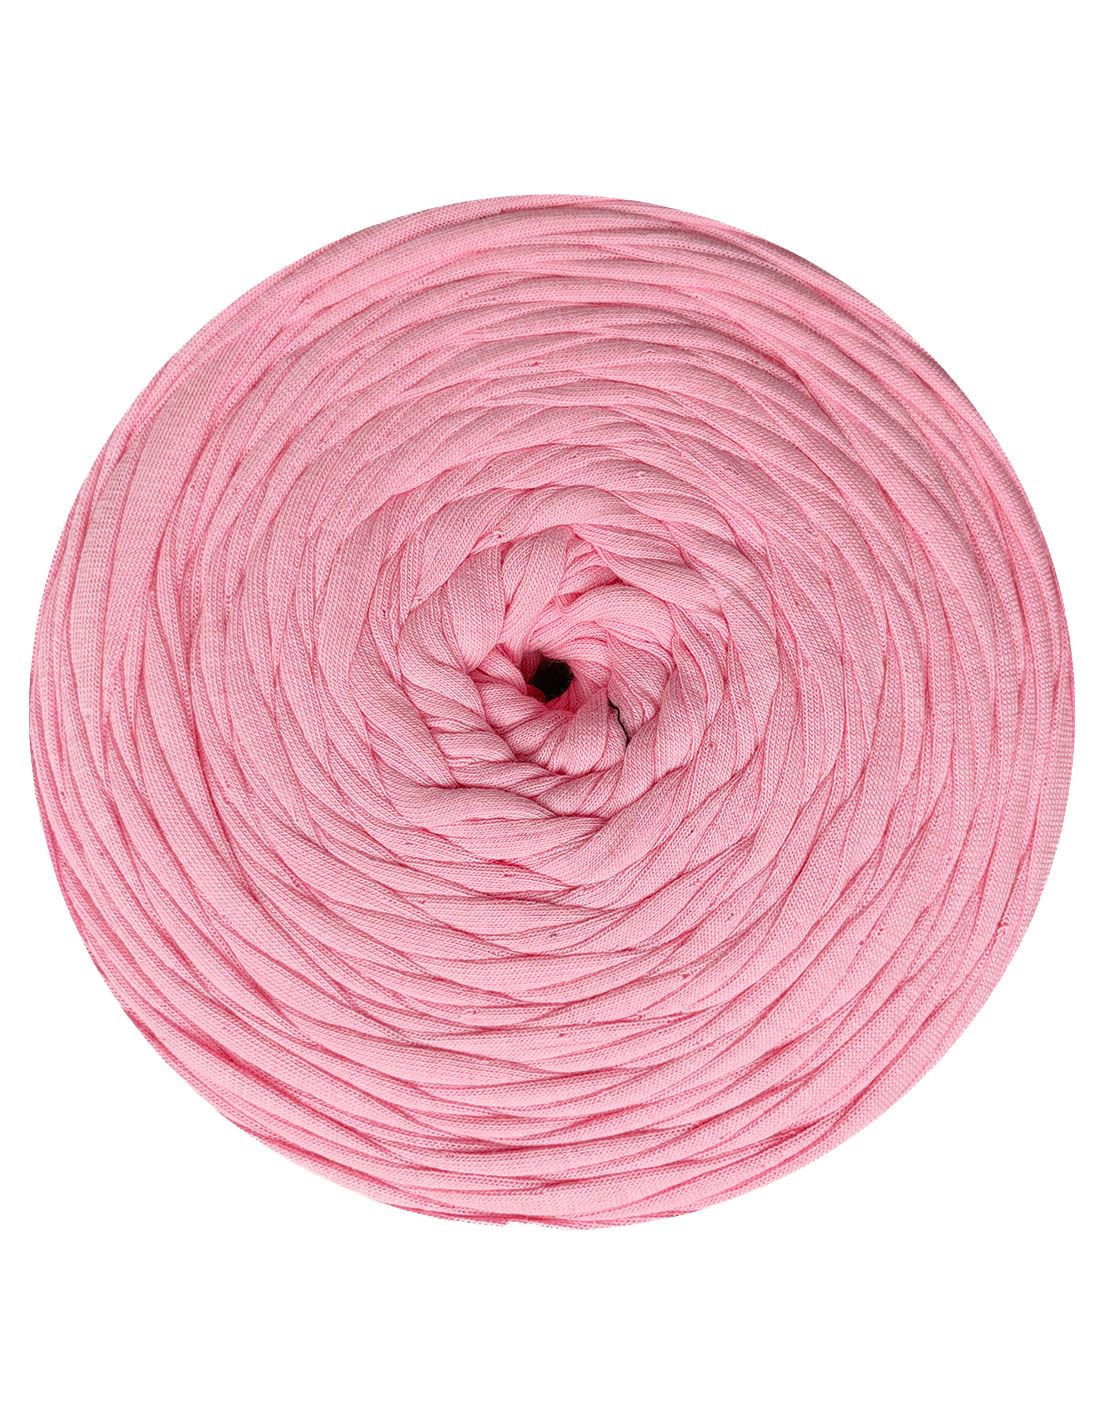 Bright pink t-shirt yarn by Hoooked Zpagetti (100-120m)